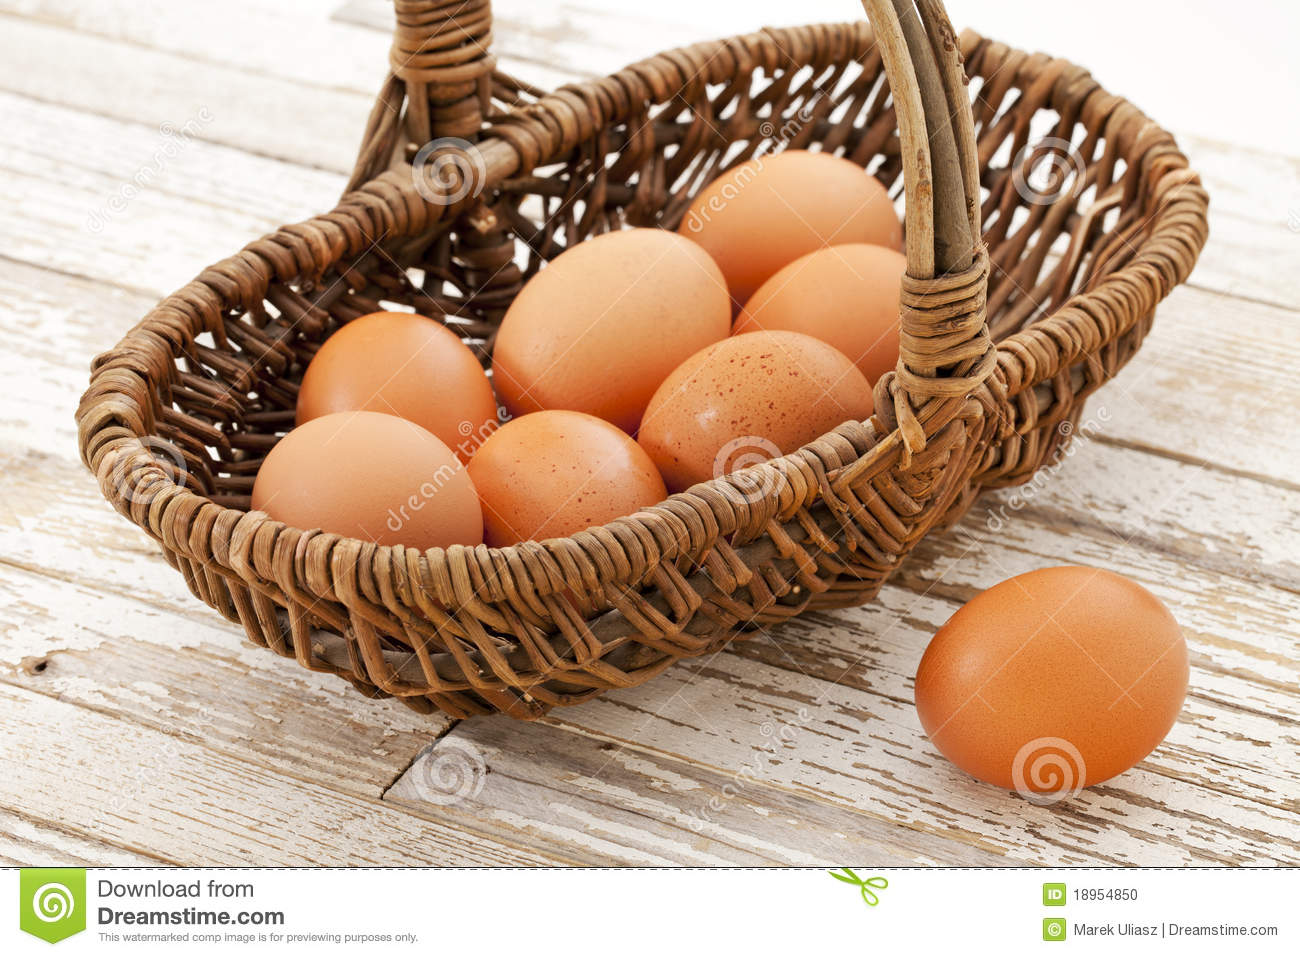 Basket Of Brown Chicken Eggs Against Grunge Wooden Table With White